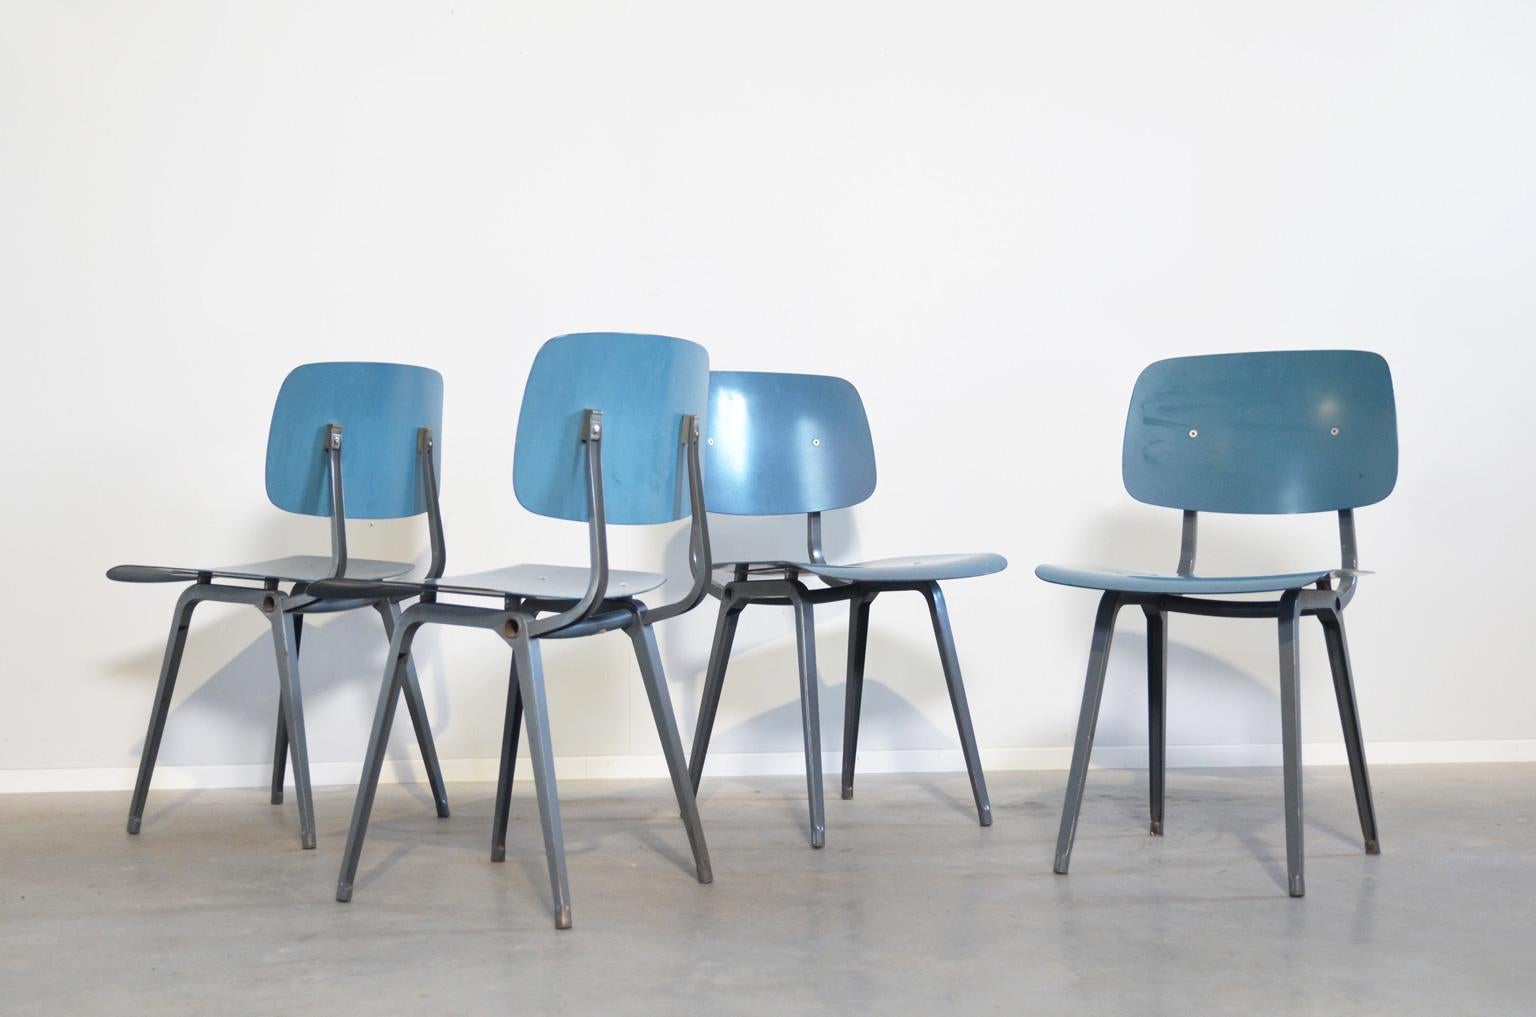 Revolt chairs in a warm color blue by Friso Kramer for Ahrend de Cirkel. A true design icon, which is still produced by Ahrend de Cirkel and highly appreciated among collectors. The chairs are marked under the seating. 